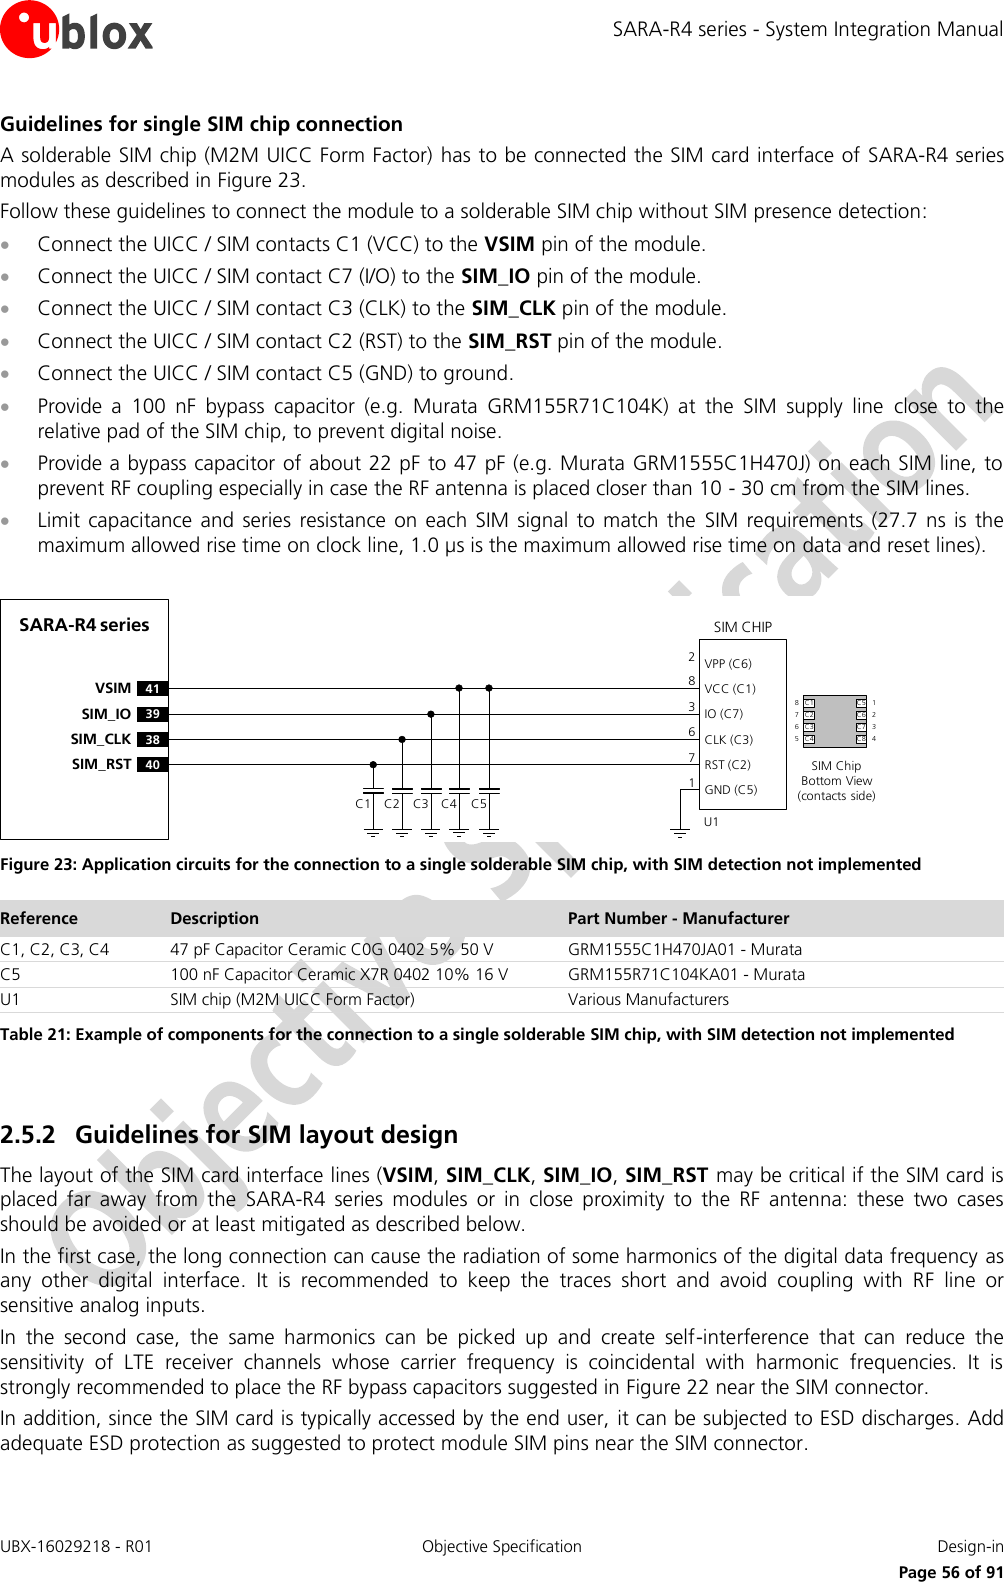 SARA-R4 series - System Integration Manual UBX-16029218 - R01  Objective Specification  Design-in     Page 56 of 91 Guidelines for single SIM chip connection A solderable SIM chip (M2M UICC Form Factor) has to be connected the SIM card interface of  SARA-R4 series modules as described in Figure 23. Follow these guidelines to connect the module to a solderable SIM chip without SIM presence detection:  Connect the UICC / SIM contacts C1 (VCC) to the VSIM pin of the module.  Connect the UICC / SIM contact C7 (I/O) to the SIM_IO pin of the module.  Connect the UICC / SIM contact C3 (CLK) to the SIM_CLK pin of the module.  Connect the UICC / SIM contact C2 (RST) to the SIM_RST pin of the module.  Connect the UICC / SIM contact C5 (GND) to ground.  Provide  a  100  nF  bypass  capacitor  (e.g.  Murata  GRM155R71C104K)  at  the  SIM  supply  line  close  to  the relative pad of the SIM chip, to prevent digital noise.   Provide a bypass capacitor of about 22 pF to 47 pF (e.g. Murata GRM1555C1H470J) on each SIM line, to prevent RF coupling especially in case the RF antenna is placed closer than 10 - 30 cm from the SIM lines.  Limit capacitance  and  series resistance  on each  SIM  signal to  match the  SIM  requirements (27.7  ns is  the maximum allowed rise time on clock line, 1.0 µs is the maximum allowed rise time on data and reset lines).  SARA-R4 series41VSIM39SIM_IO38SIM_CLK40SIM_RSTSIM CHIPSIM ChipBottom View (contacts side)C1VPP (C6)VCC (C1)IO (C7)CLK (C3)RST (C2)GND (C5)C2 C3 C5U1C4283671C1 C5C2 C6C3 C7C4 C887651234 Figure 23: Application circuits for the connection to a single solderable SIM chip, with SIM detection not implemented Reference Description Part Number - Manufacturer C1, C2, C3, C4 47 pF Capacitor Ceramic C0G 0402 5% 50 V GRM1555C1H470JA01 - Murata C5 100 nF Capacitor Ceramic X7R 0402 10% 16 V GRM155R71C104KA01 - Murata U1 SIM chip (M2M UICC Form Factor) Various Manufacturers Table 21: Example of components for the connection to a single solderable SIM chip, with SIM detection not implemented  2.5.2 Guidelines for SIM layout design The layout of the SIM card interface lines (VSIM, SIM_CLK, SIM_IO, SIM_RST may be critical if the SIM card is placed  far  away  from  the  SARA-R4  series  modules  or  in  close  proximity  to  the  RF  antenna:  these  two  cases should be avoided or at least mitigated as described below.  In the first case, the long connection can cause the radiation of some harmonics of the digital data frequency as any  other  digital  interface.  It  is  recommended  to  keep  the  traces  short  and  avoid  coupling  with  RF  line  or sensitive analog inputs. In  the  second  case,  the  same  harmonics  can  be  picked  up  and  create  self-interference  that  can  reduce  the sensitivity  of  LTE  receiver  channels  whose  carrier  frequency  is  coincidental  with  harmonic  frequencies.  It  is strongly recommended to place the RF bypass capacitors suggested in Figure 22 near the SIM connector. In addition, since the SIM card is typically accessed by the end user, it can be subjected to ESD discharges. Add adequate ESD protection as suggested to protect module SIM pins near the SIM connector. 